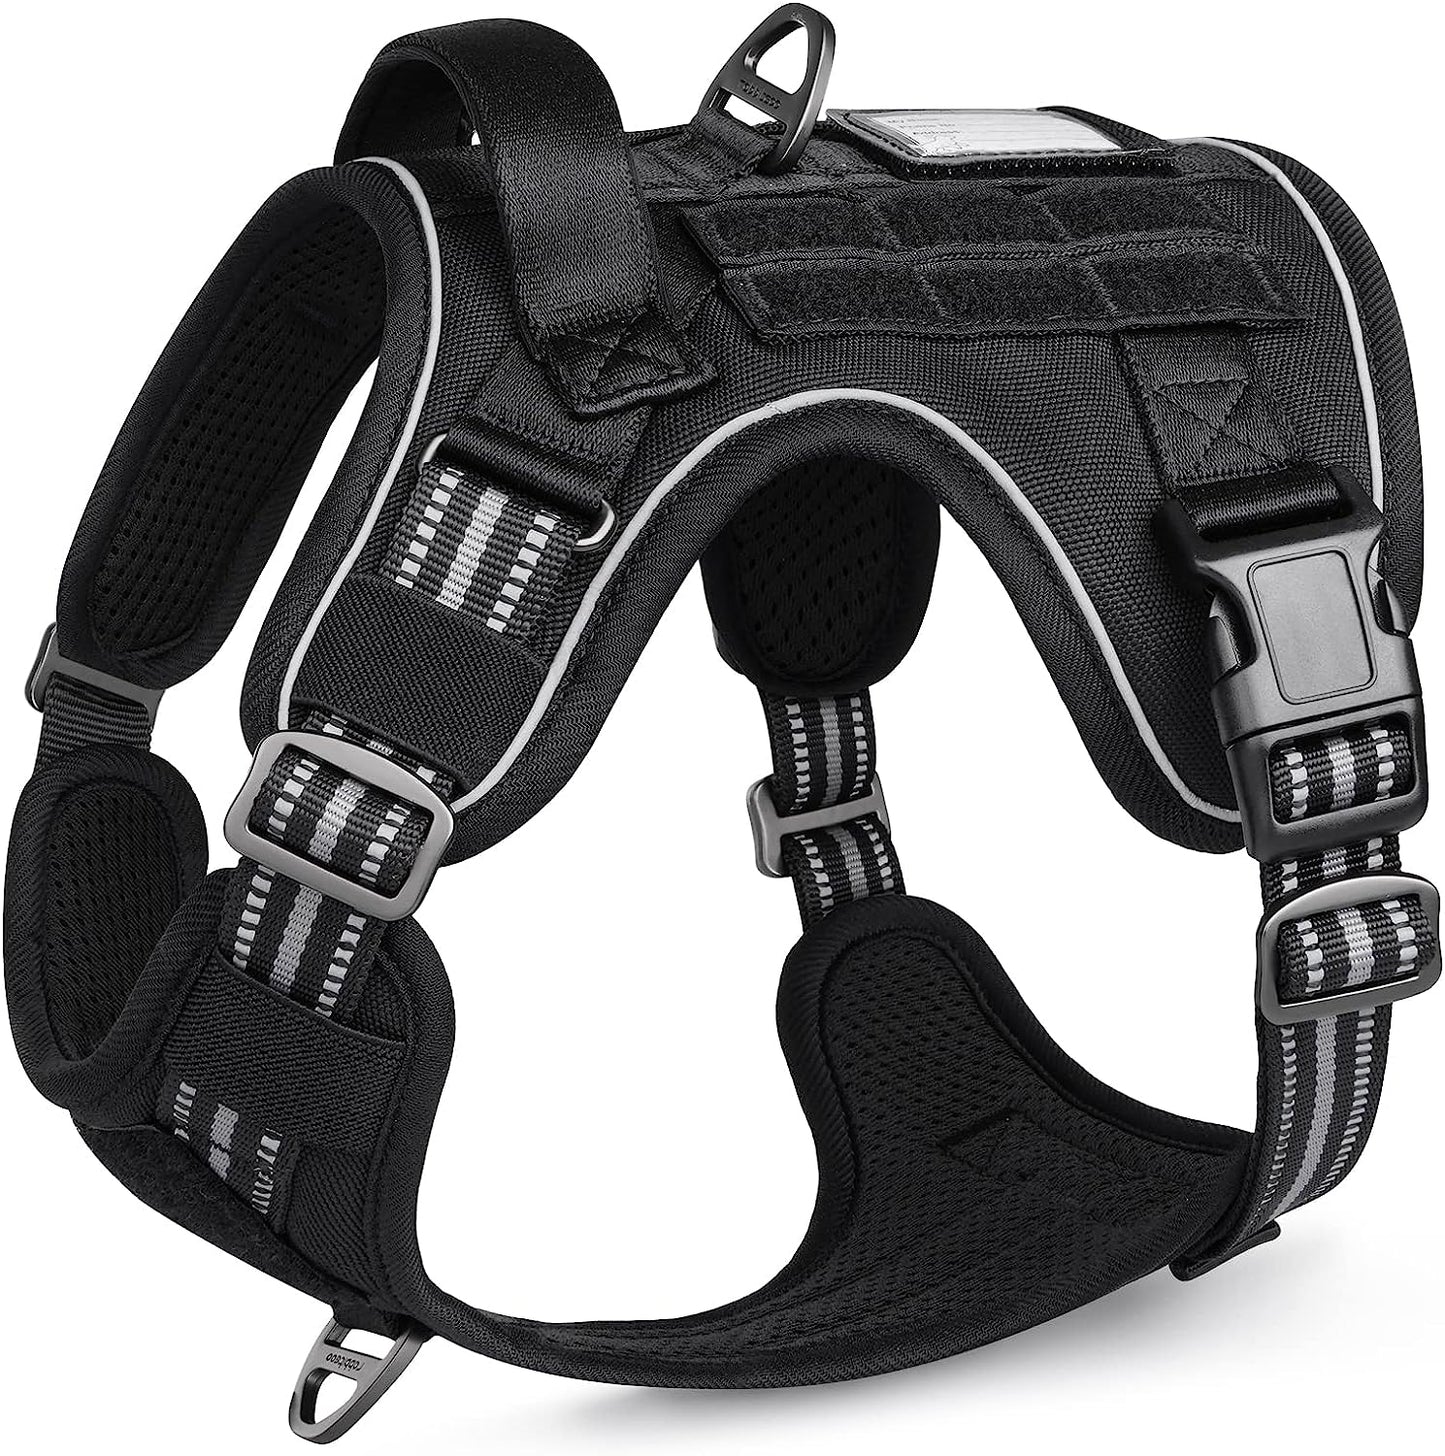 Rabbitgoo Tactical Dog Harness No Pull, Military Dog Vest Harness with Handle & Molle, Easy Control Service Dog Harness for Large Dogs Training Walking, Adjustable Reflective Pet Harness, Black, L Animals & Pet Supplies > Pet Supplies > Dog Supplies > Dog Apparel GLOBEGOU CO.,LTD Black Large 